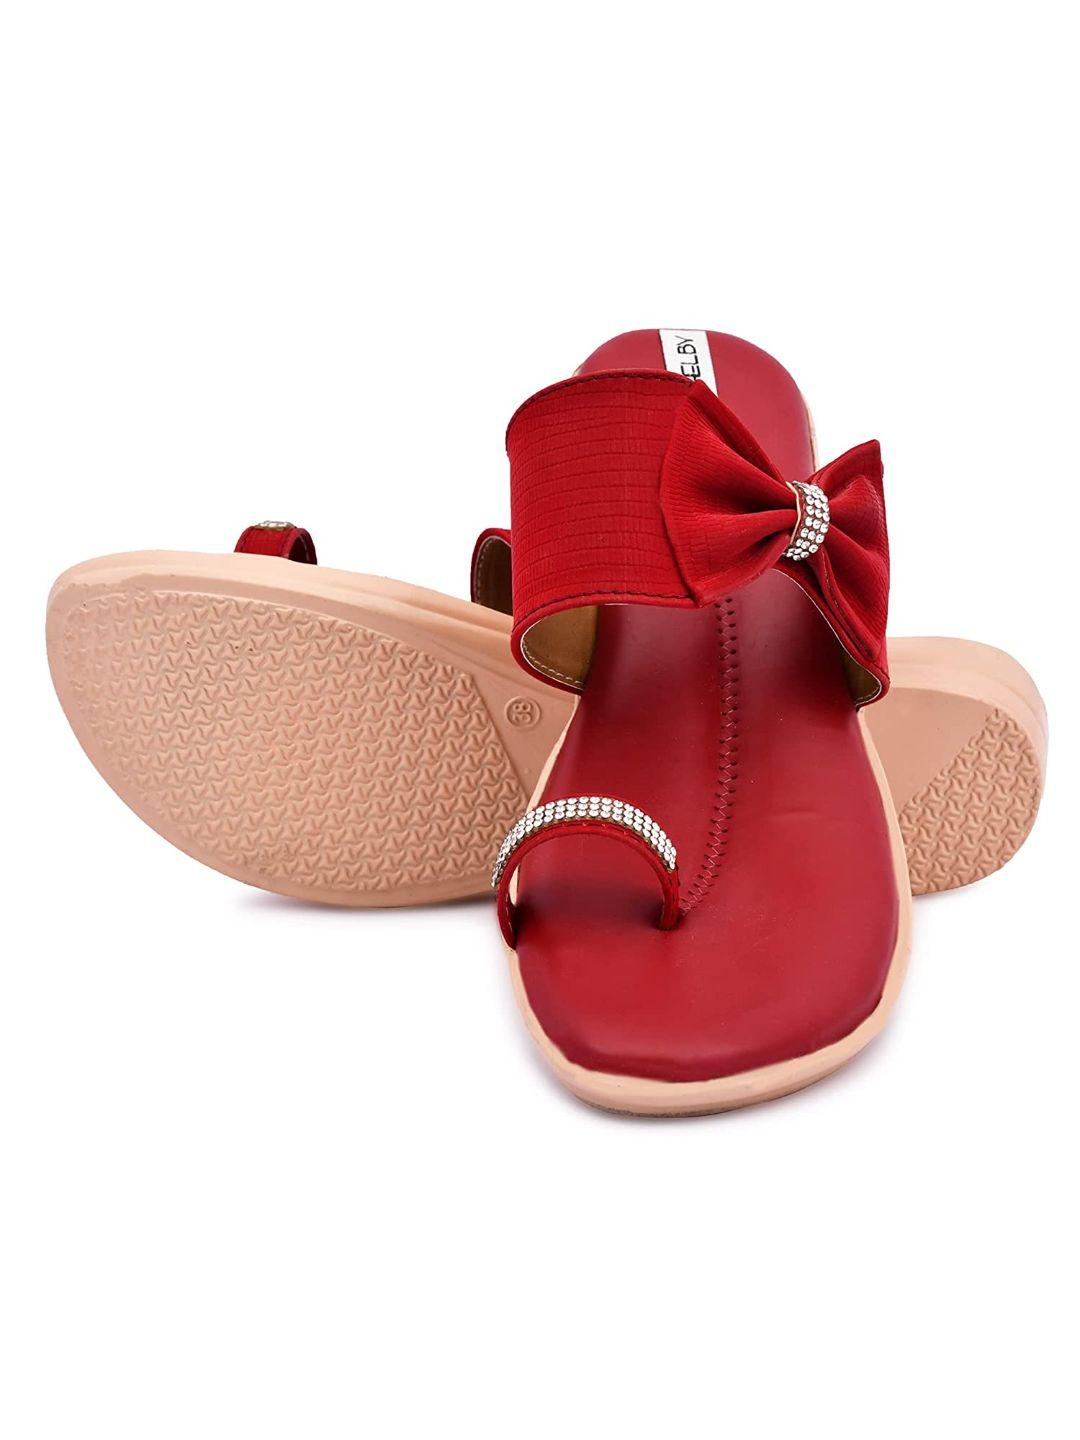 Maeve & Shelby Sandal Ethnic Leather for Women flat thumb footwear for ladies